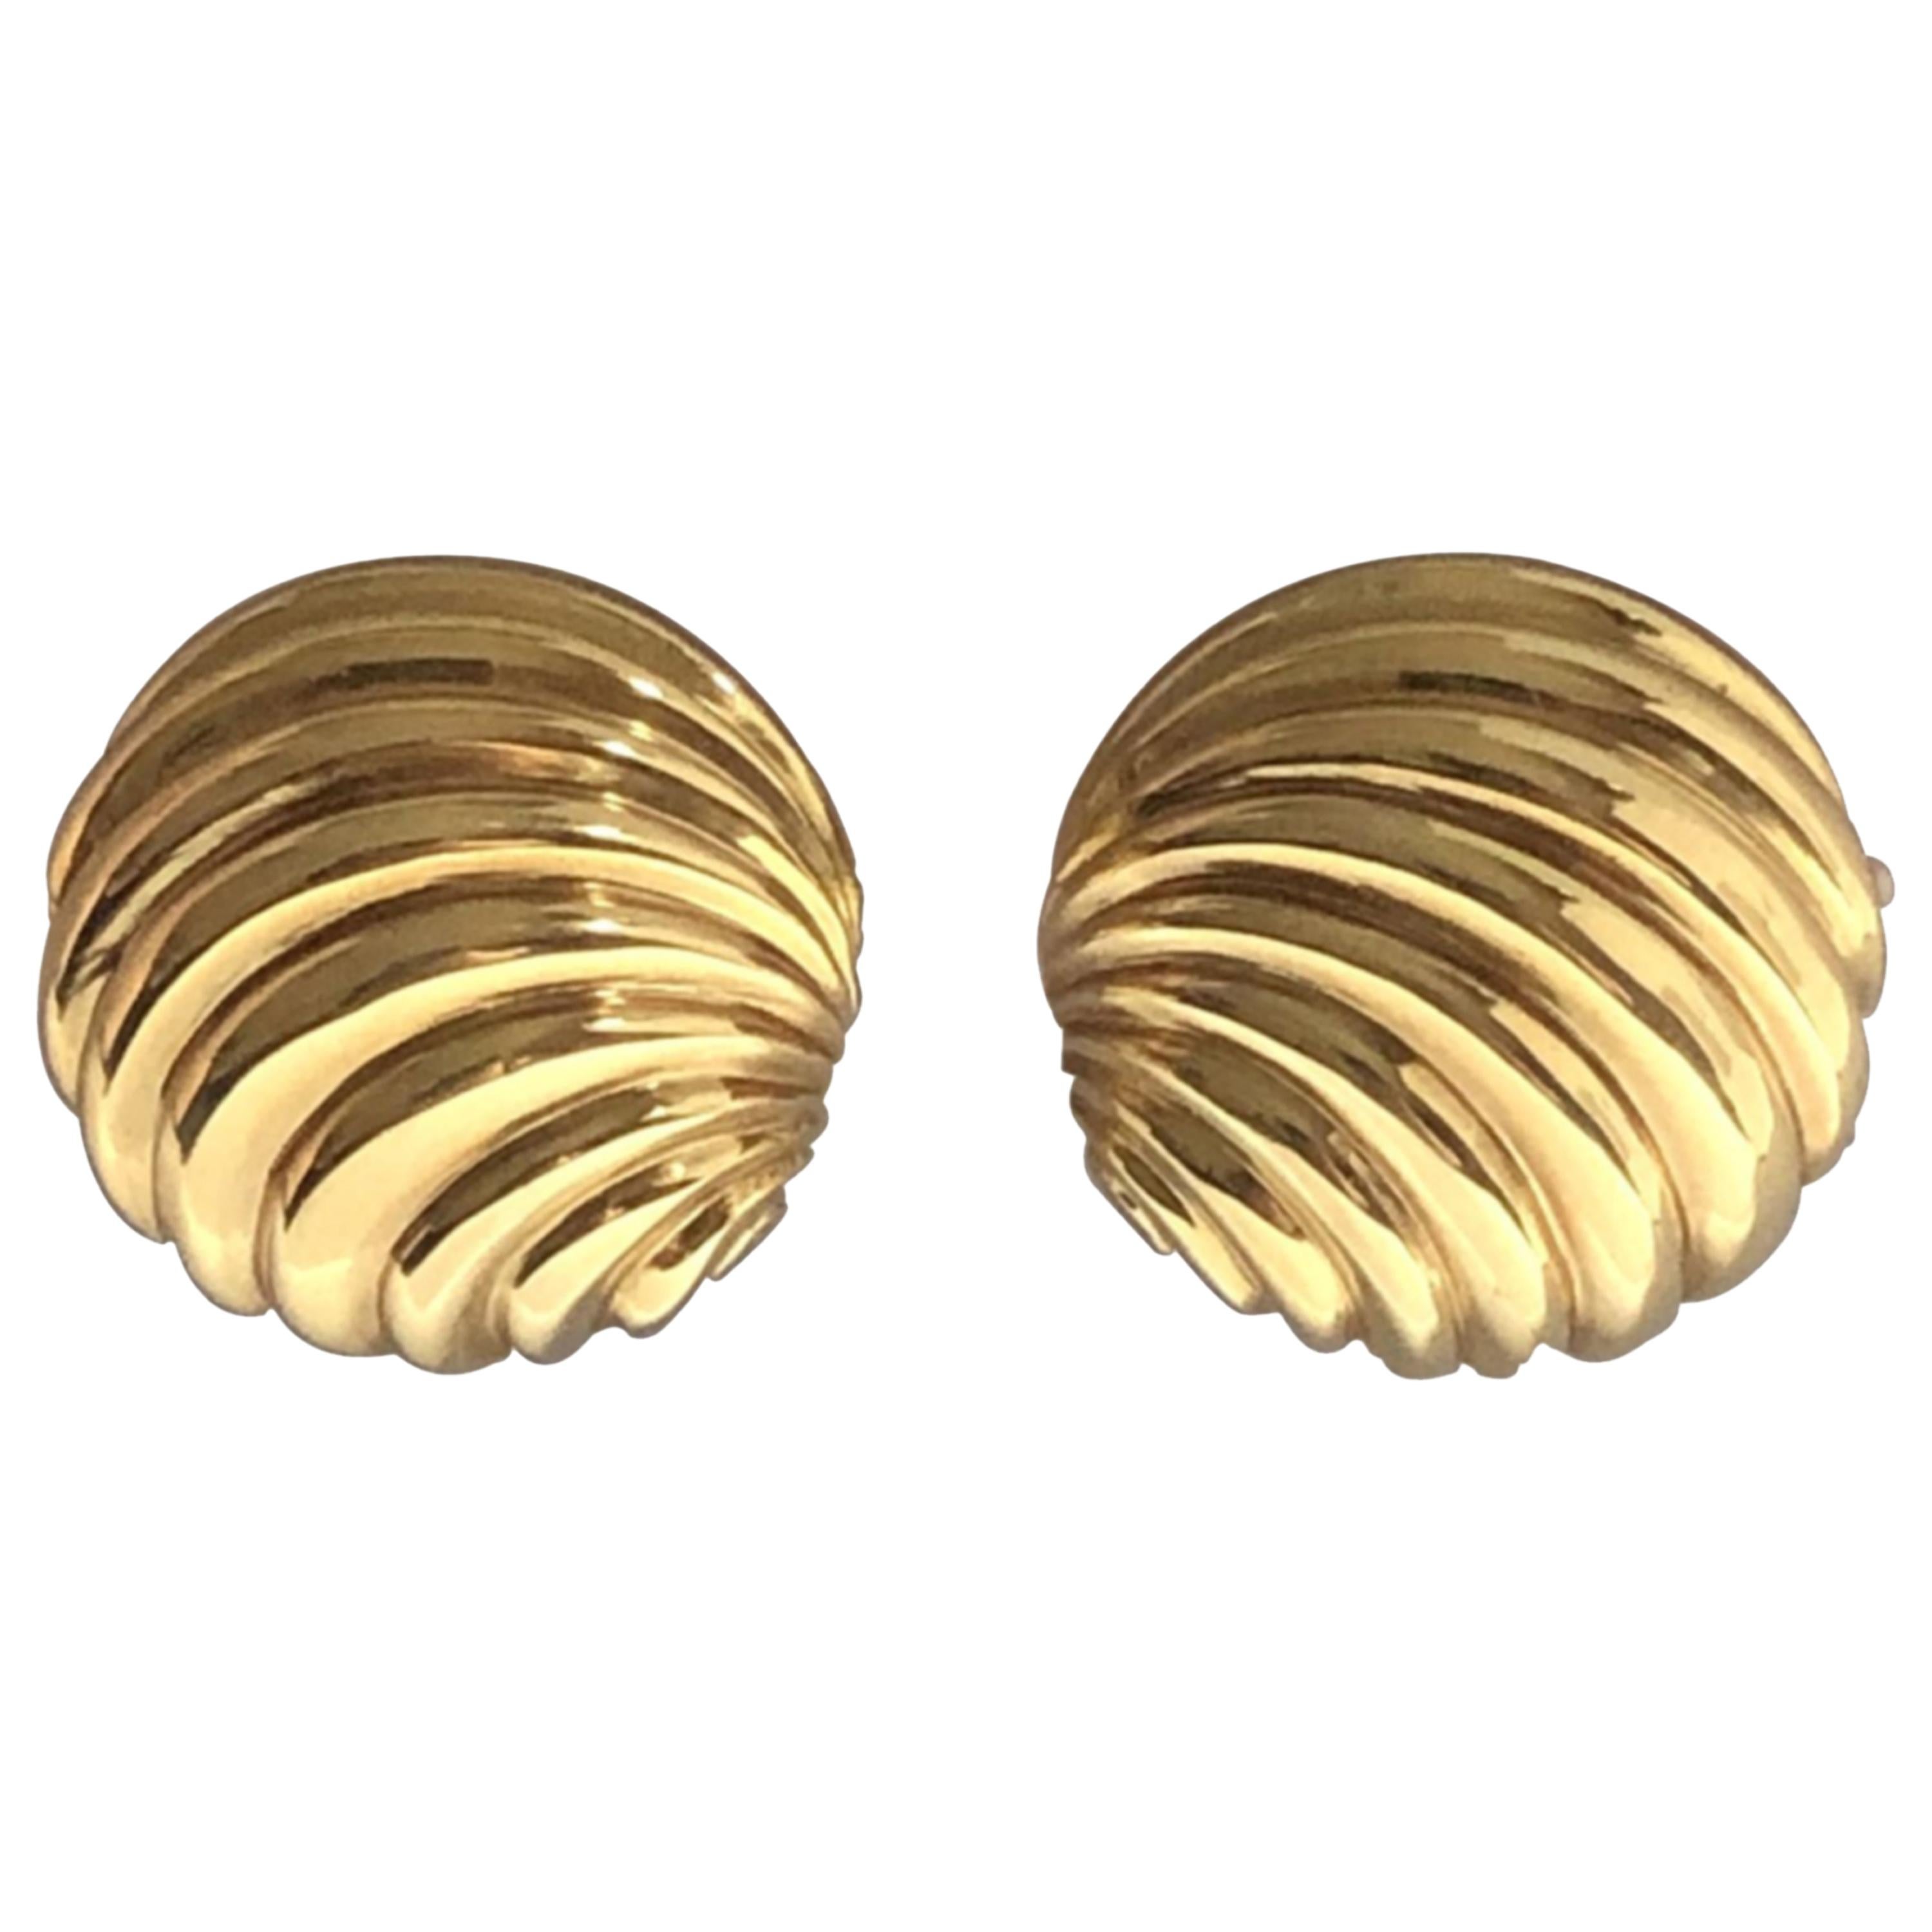 Cellini Italy Elegant Yellow Gold Shell Form Earrings